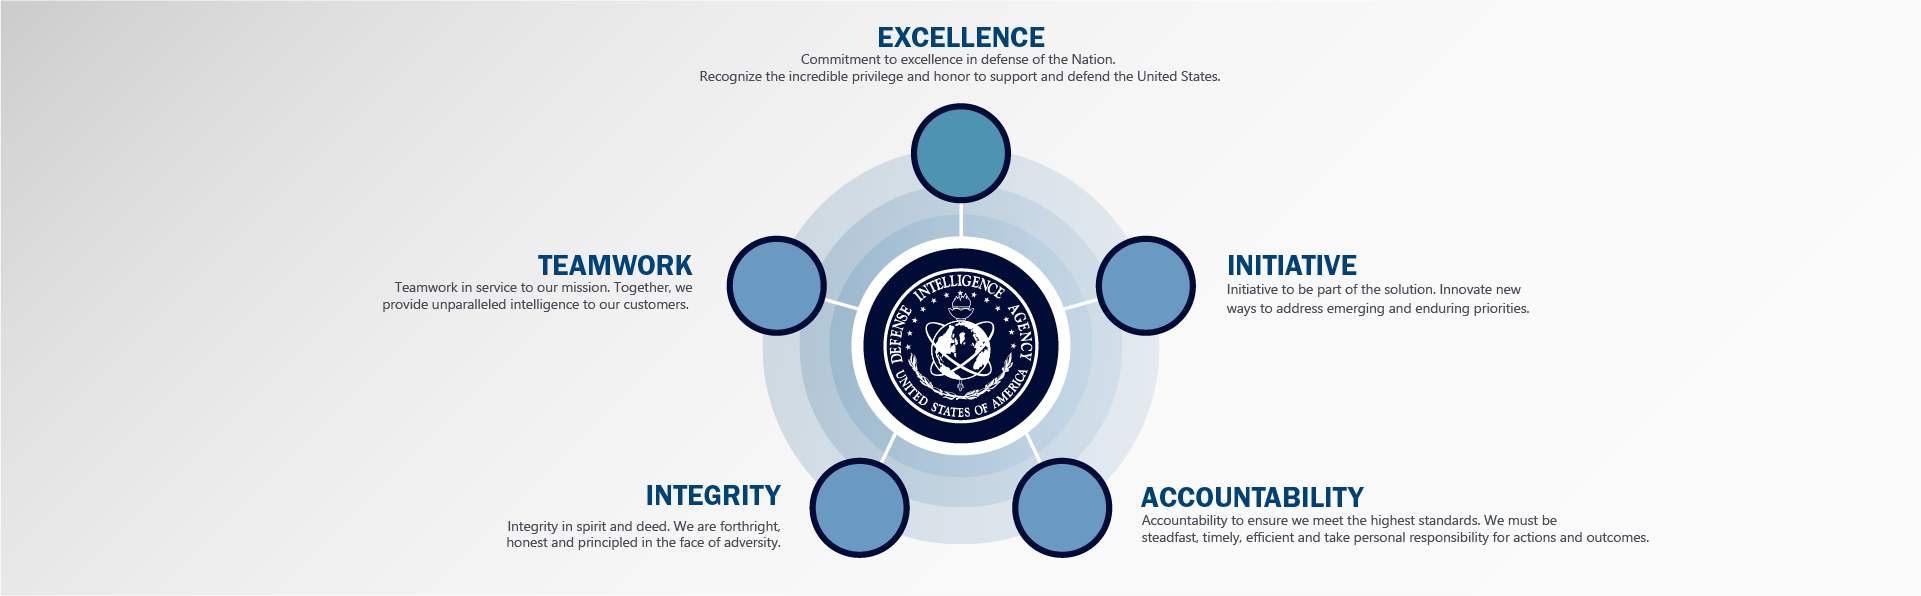 Values graphic with text and circles, each section highlighting the Values of D-I-A. Title. Excellence. Text. Commitment to excellence in defense of the Nation. Recognize the incredible privilege and honor to support and defend the United States. Second Title. Initiative. Subtext. Initiative to be part of the solution. Innovate new ways to address emerging and enduring priorities. Next Title. Accountability. Subtext. Accountability to ensure we meet teh highest standards. We must be steadfast, timely, efficient, and take personal responsibility for actions and outcomes. Next Subtitle. Integrity. Subtext. Integrity in spirit and deed. We are forthright, honest and principled in the face of adversity. Last Subtitle. Teamwork. Subtext. Teamwork in service to our mission. Together, we provide unparalleled intelligence to our customers.